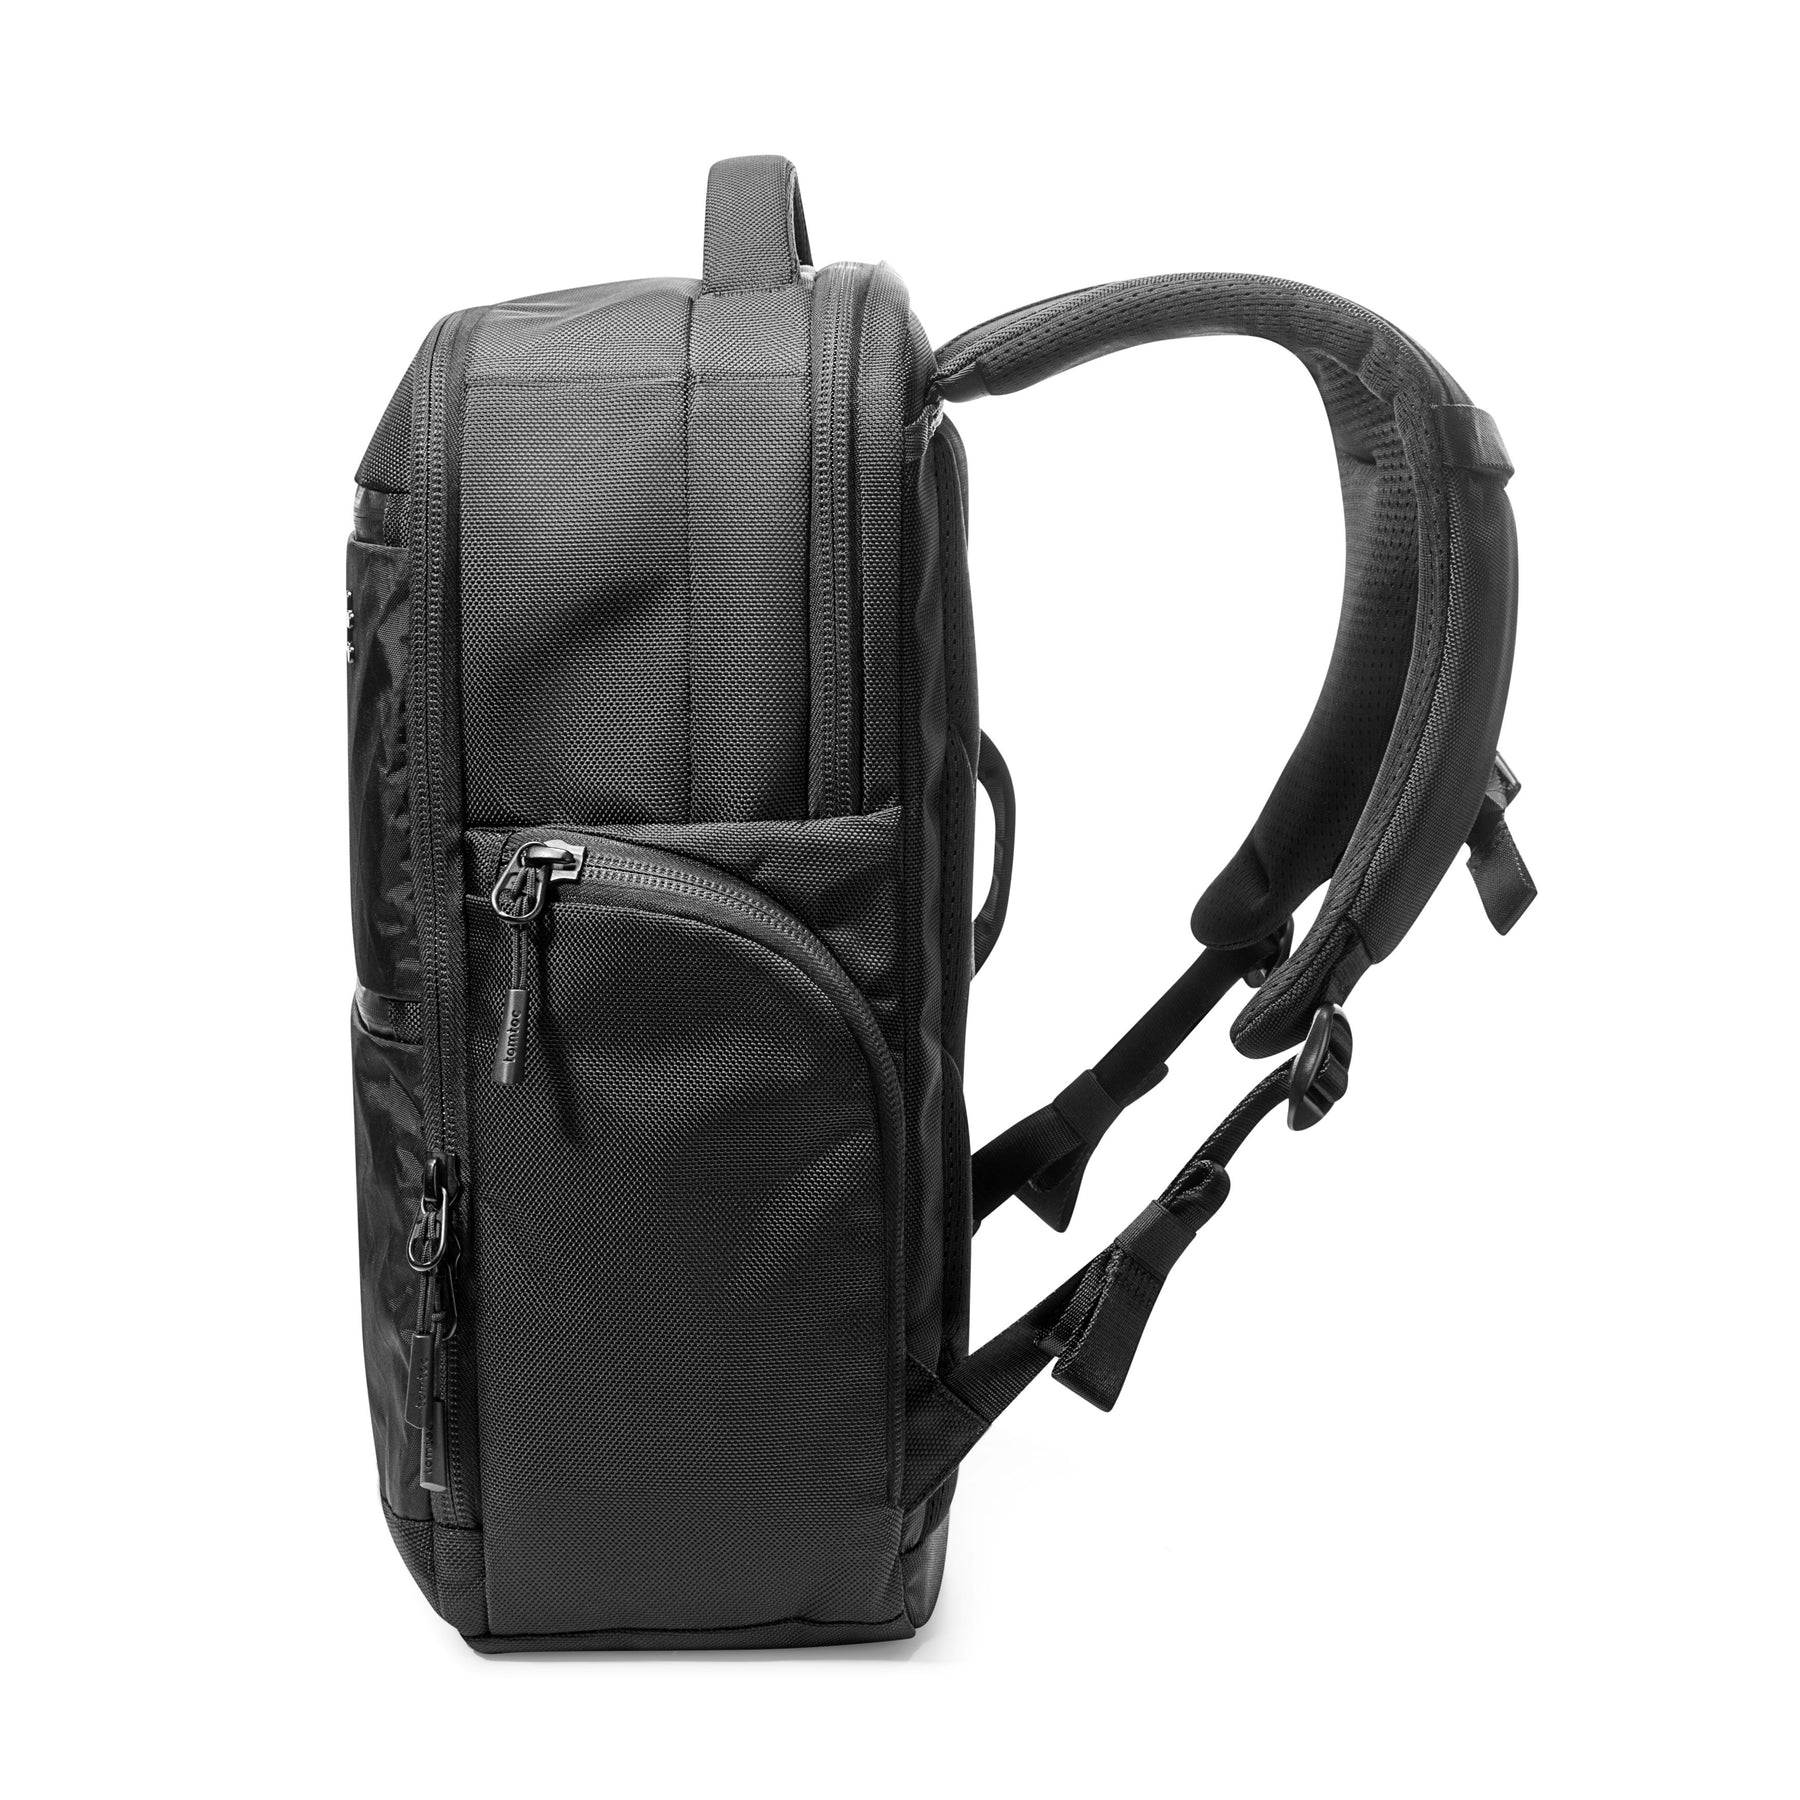 TechPack-T73 X-Pac Laptop Backpack Black 15.6-inch [30L]